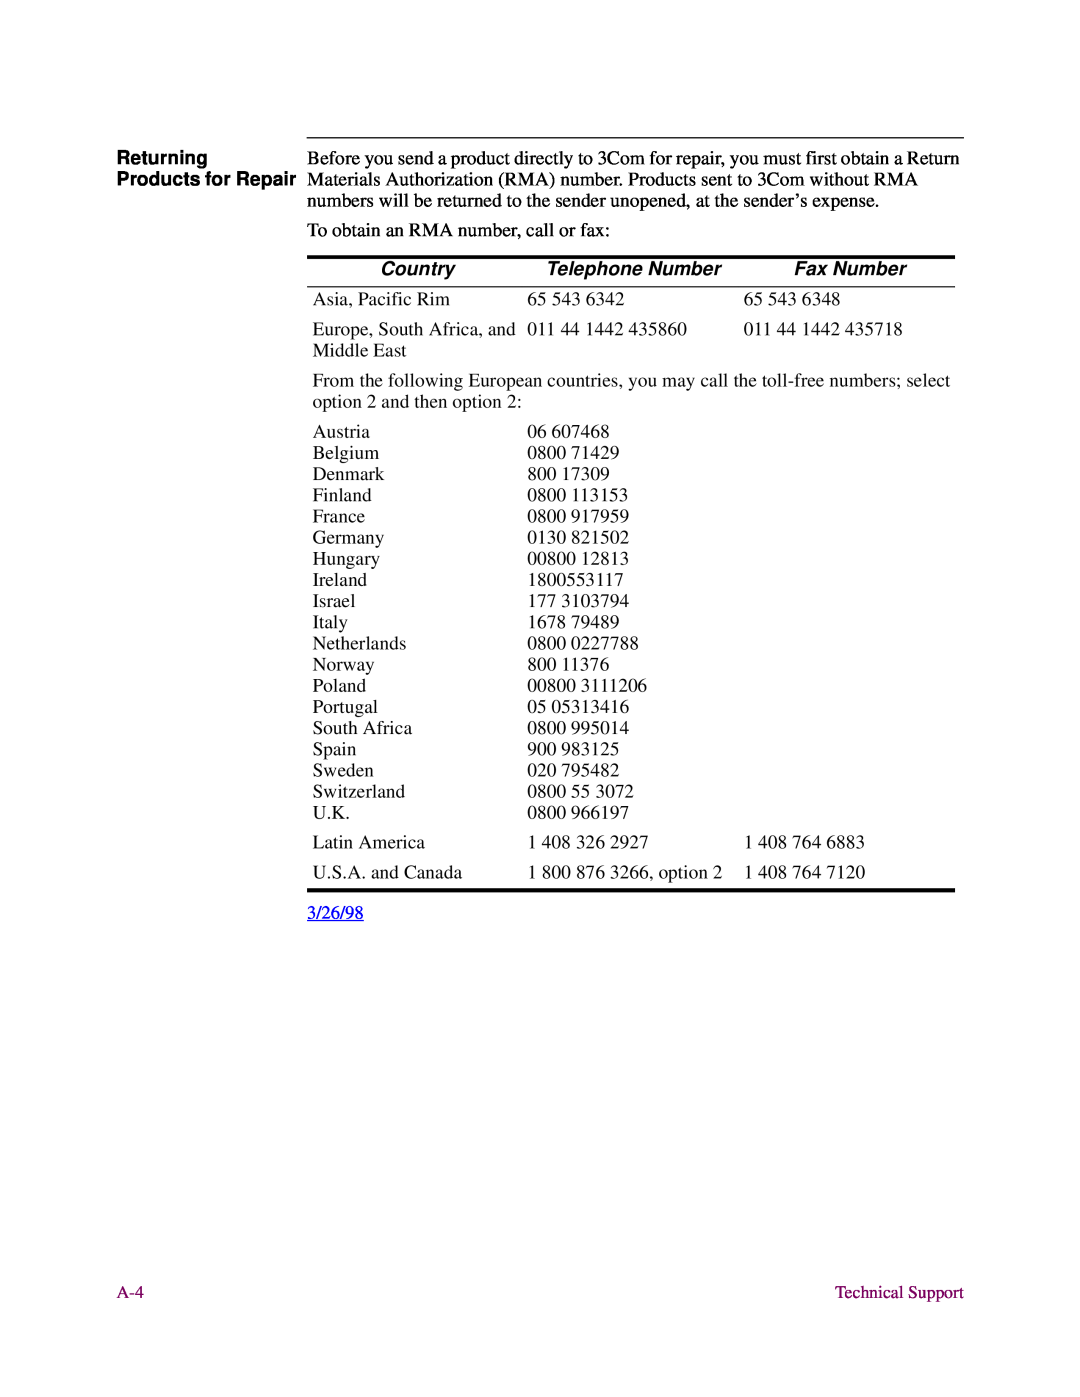 3Com S200 manual Fax Number, Country, Telephone Number, 3/26/98 